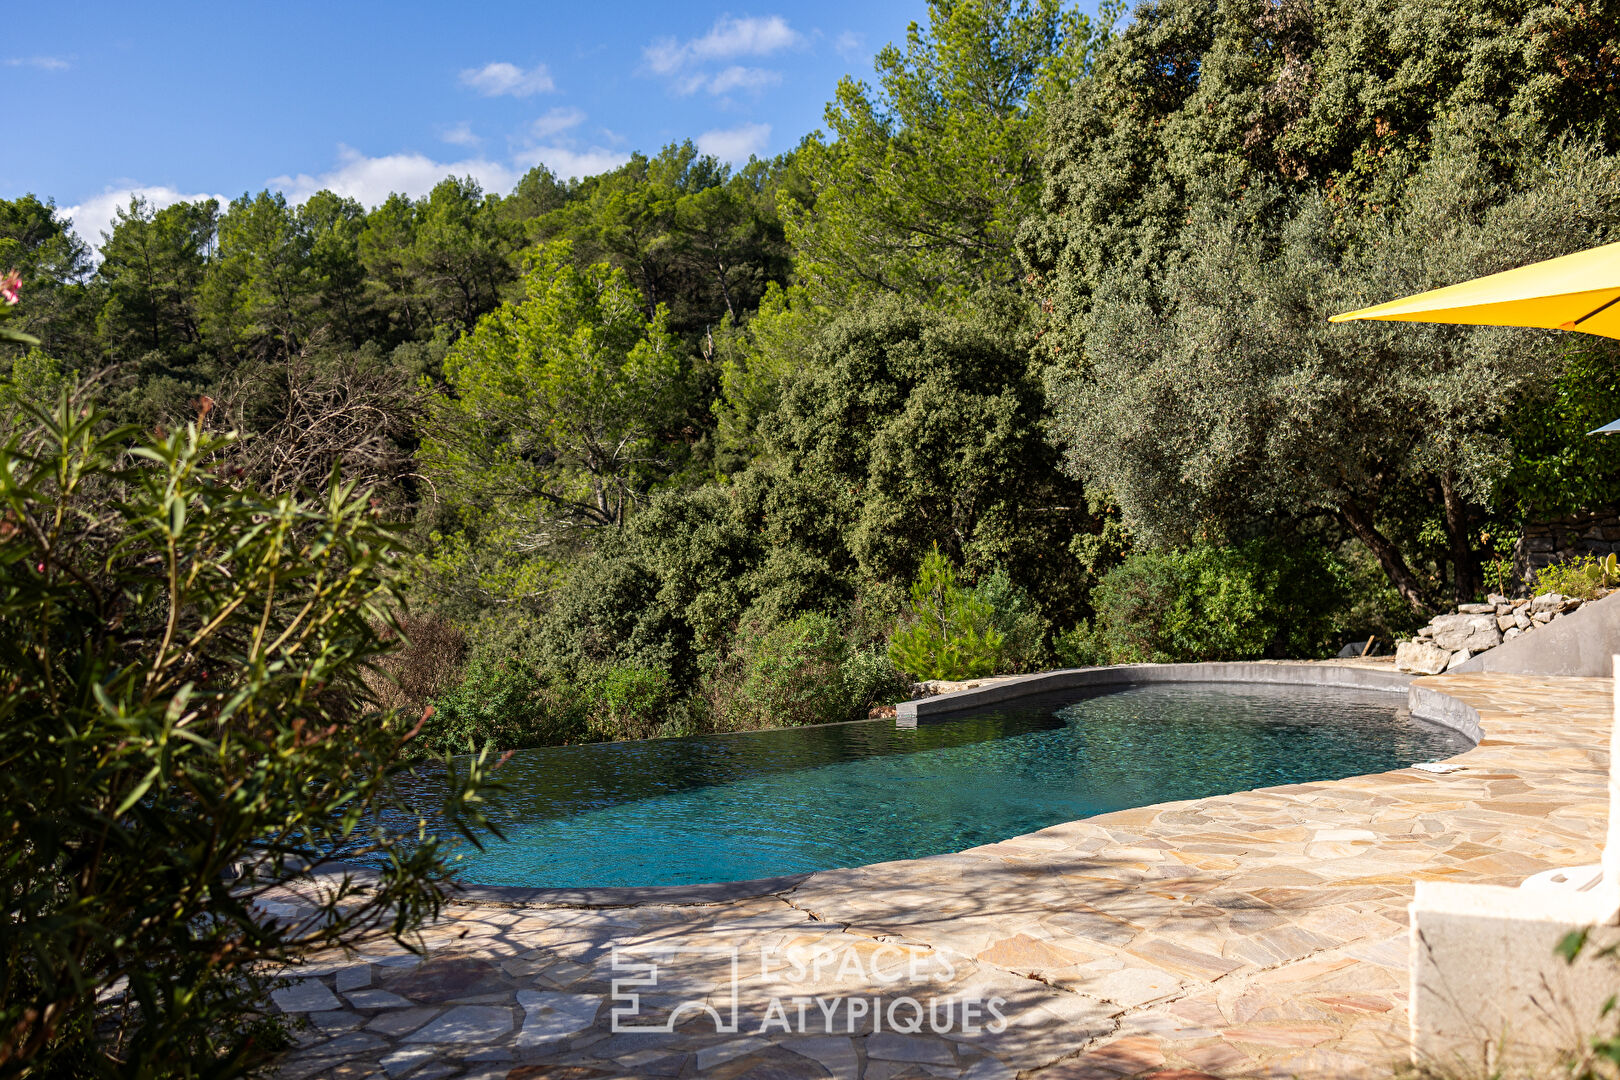 Provencal villa and its unusual outbuildings